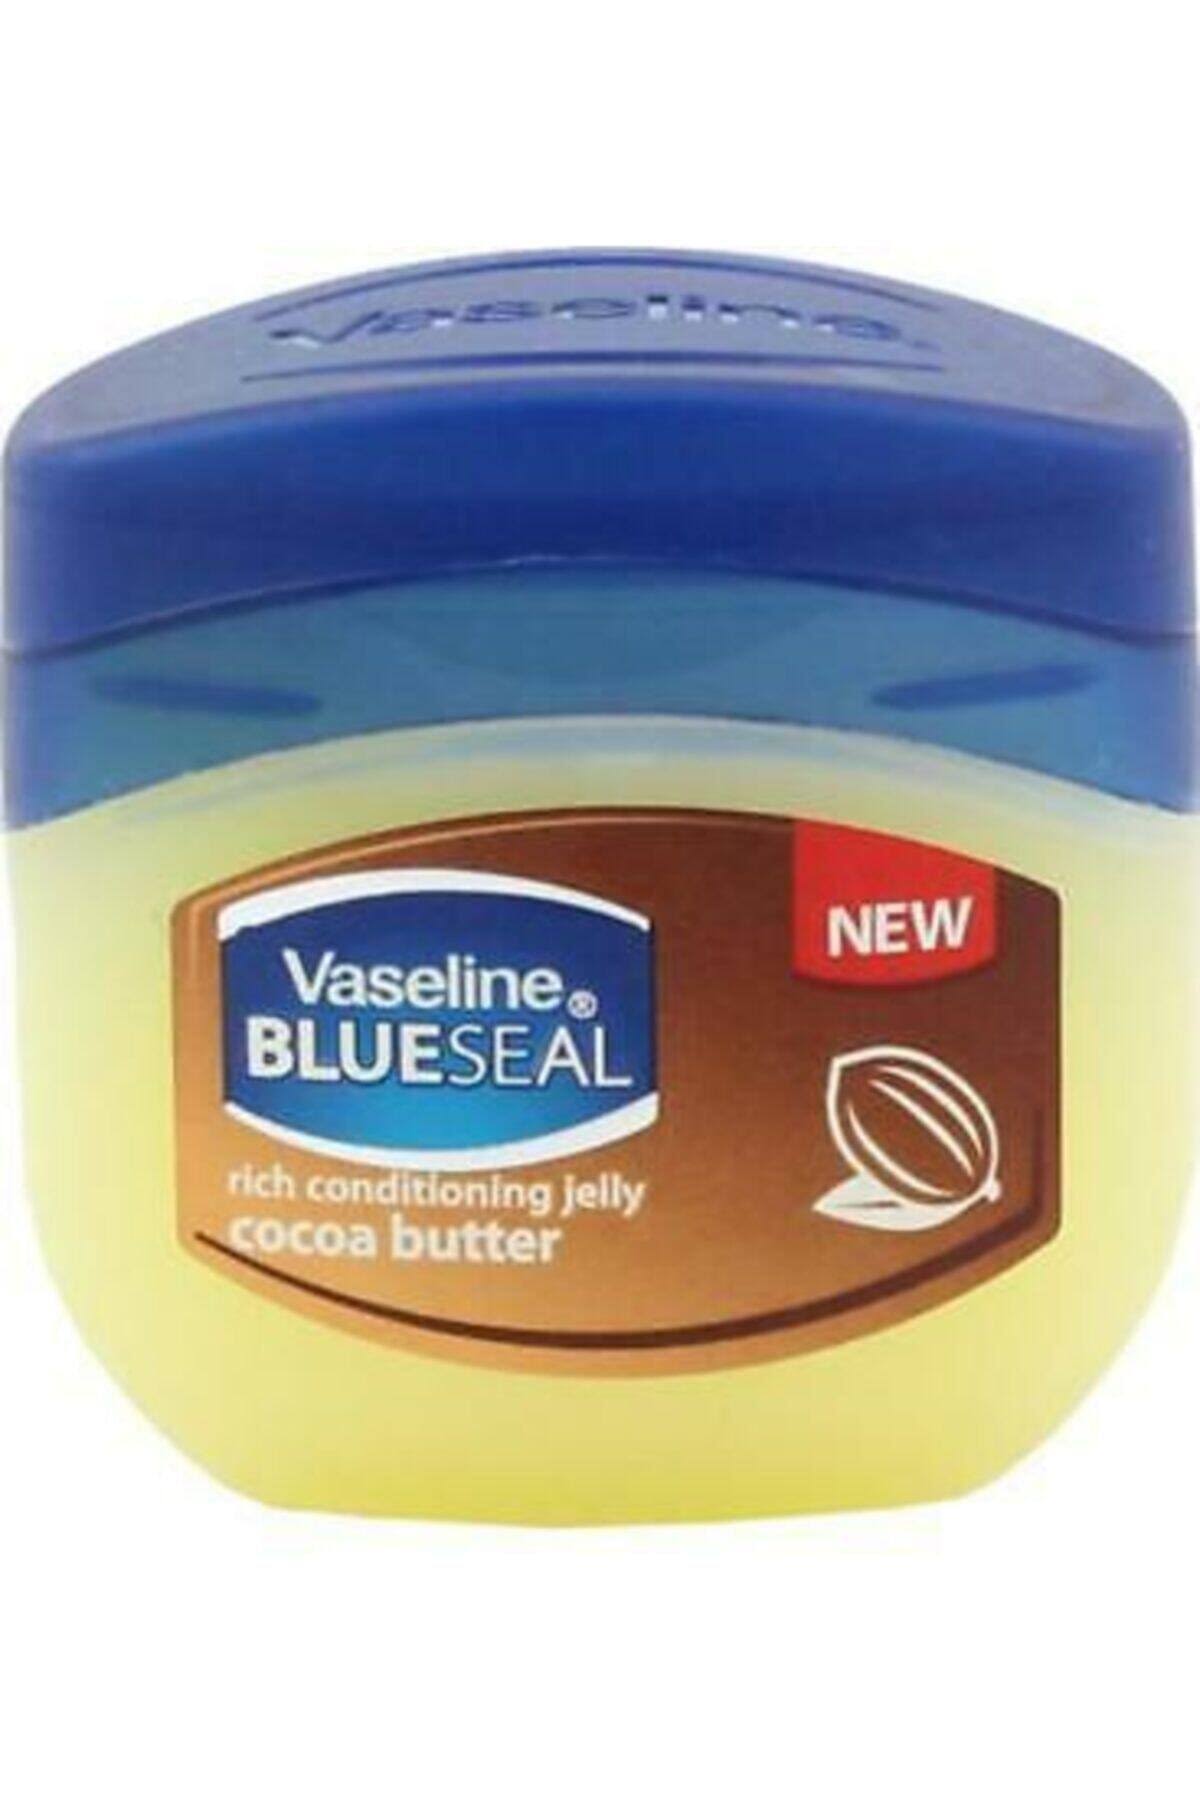 Vaseline Blueseal Rich Conditioning Jelly - Cocoa Butter, 50ml